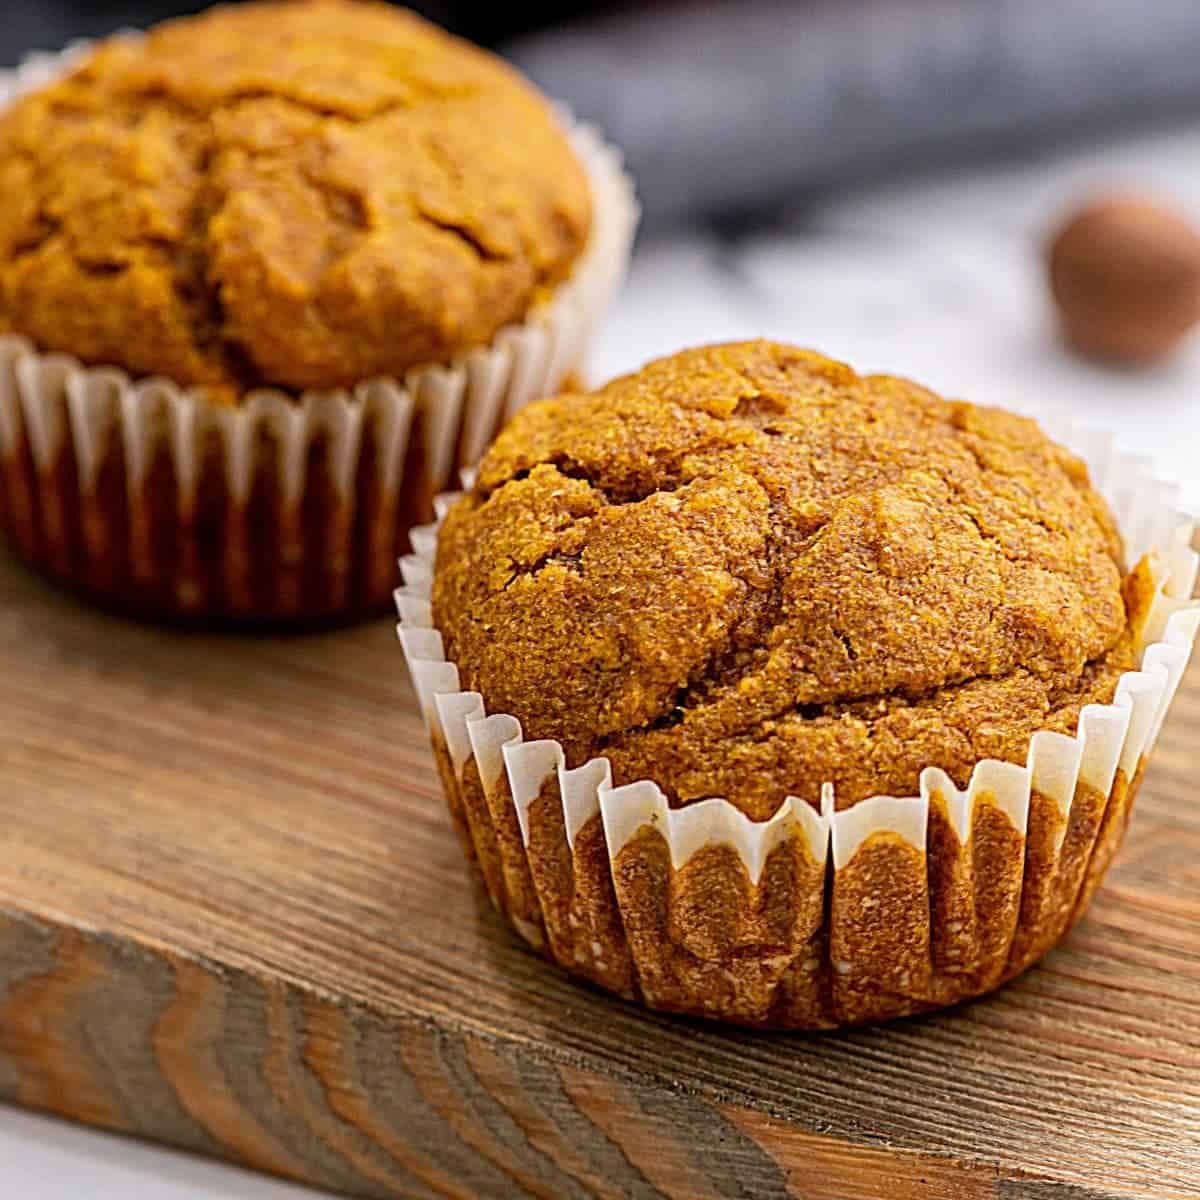 Baked Whole Wheat Pumpkin Muffins on wooden cutting board